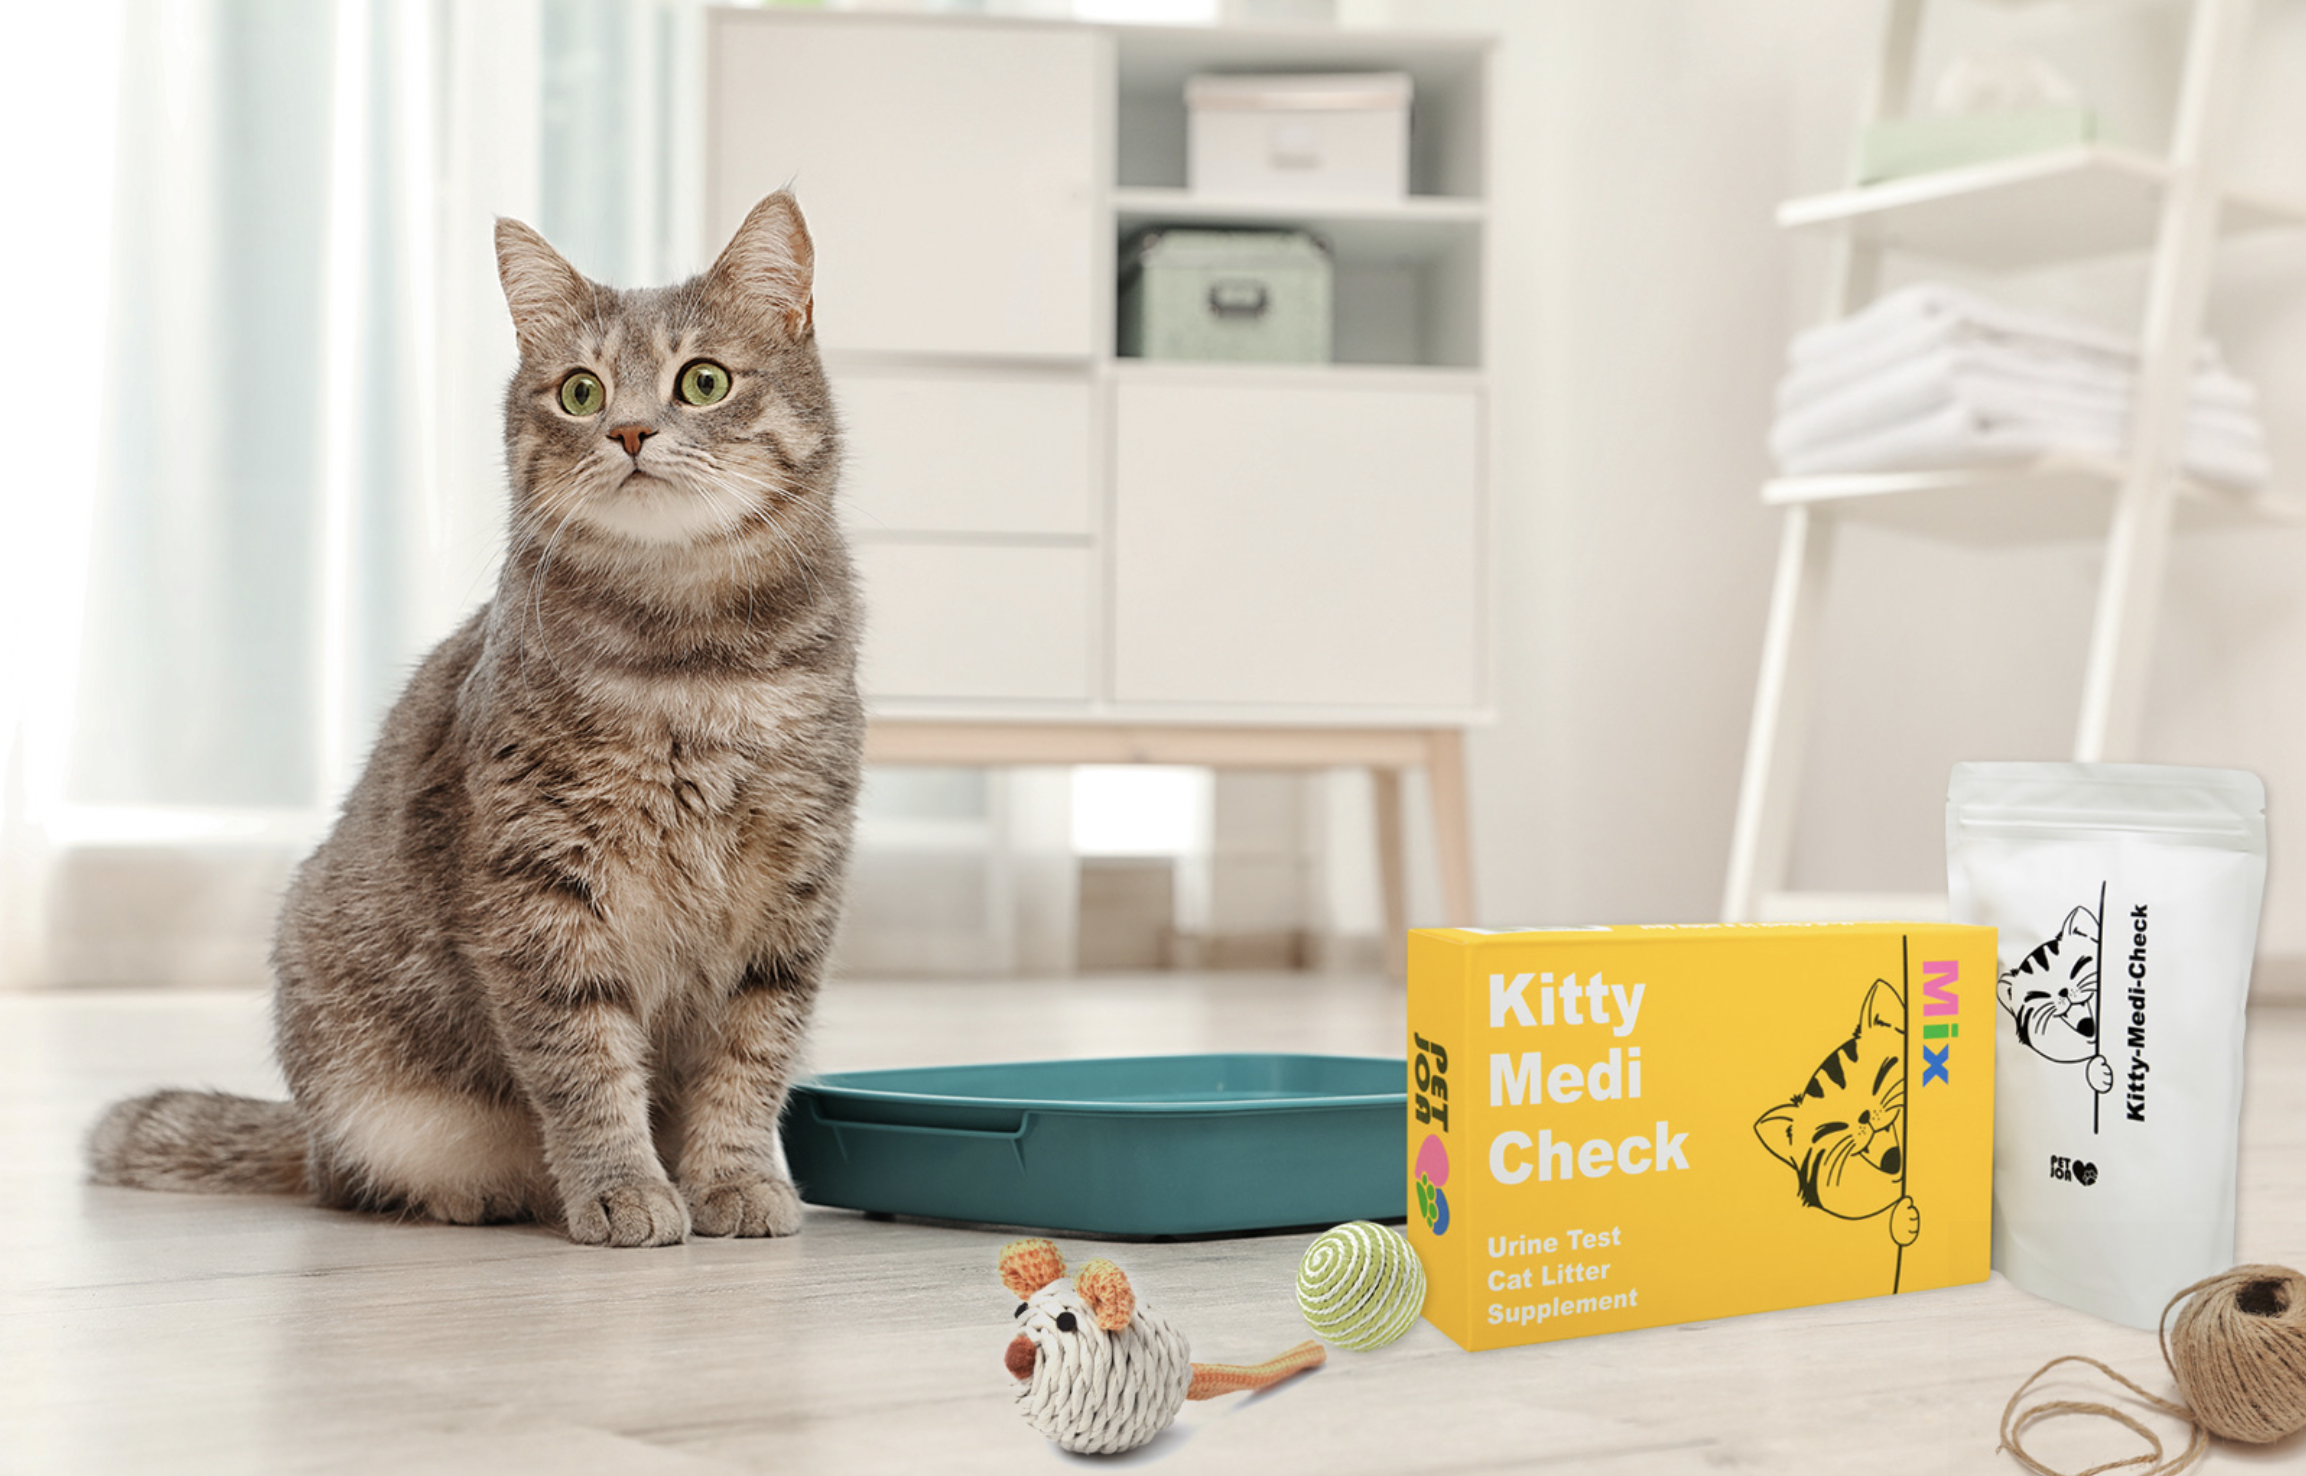 Kitty Medi Check is a cat urine test litter supplement created by the pet care company PETJOA.